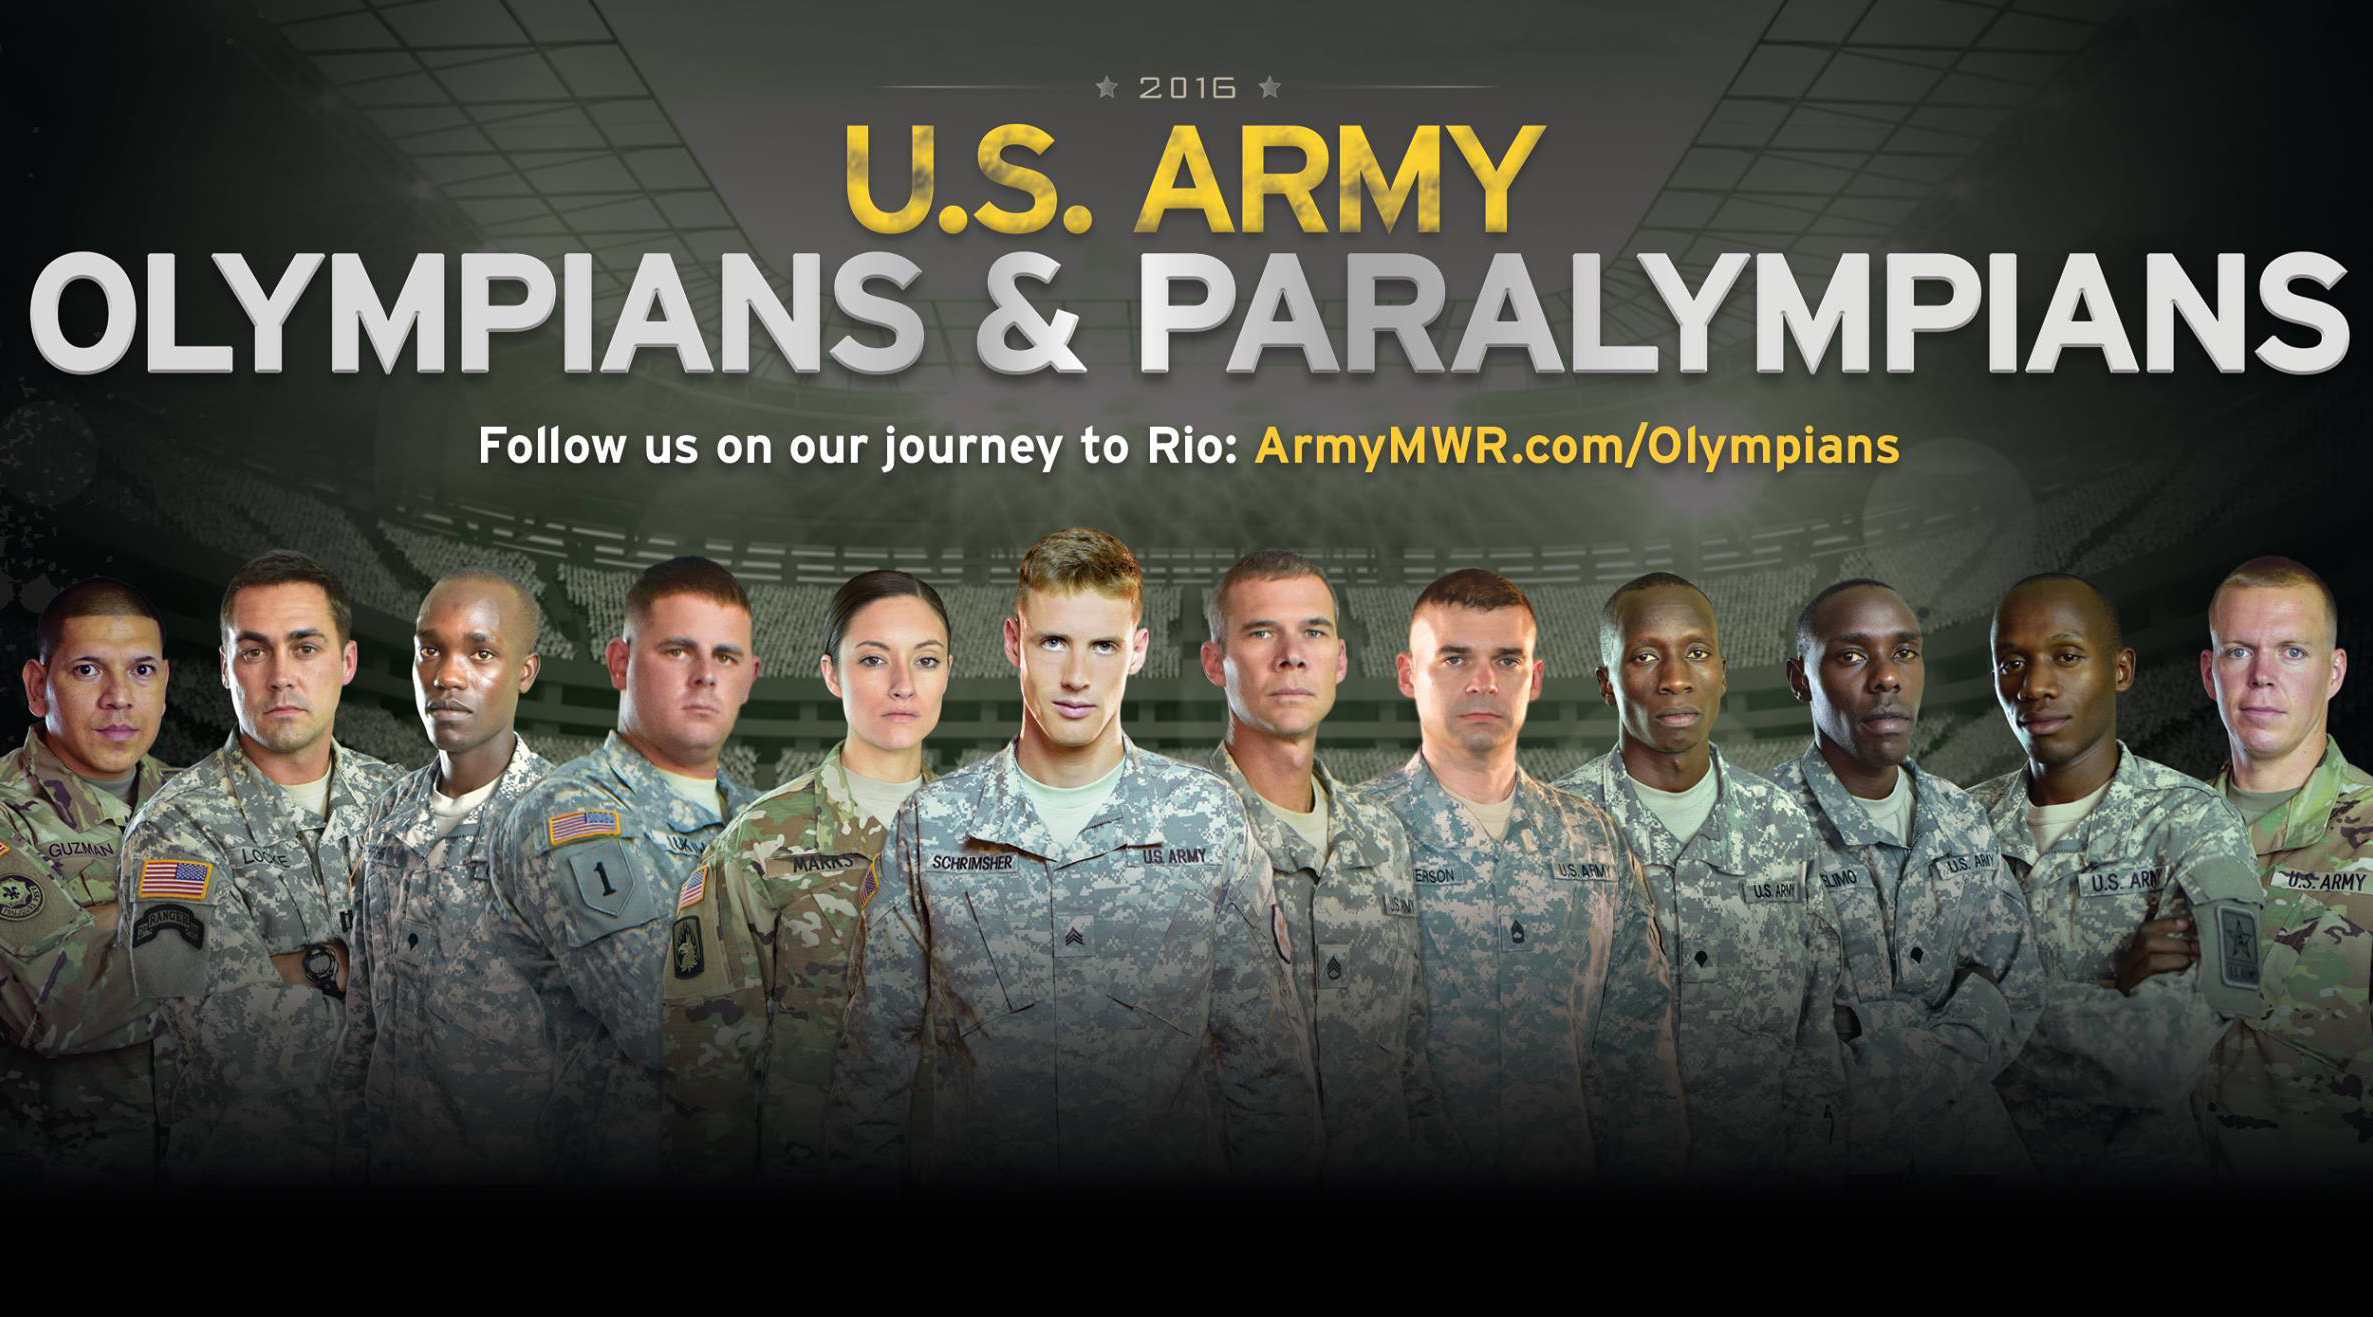 Fifteen U.S. Army Soldiers will begin their quest for medals on the grandest stage in sports tonight as the 2016 Summer Olympics kick off in Rio de Janeiro, Brazil.